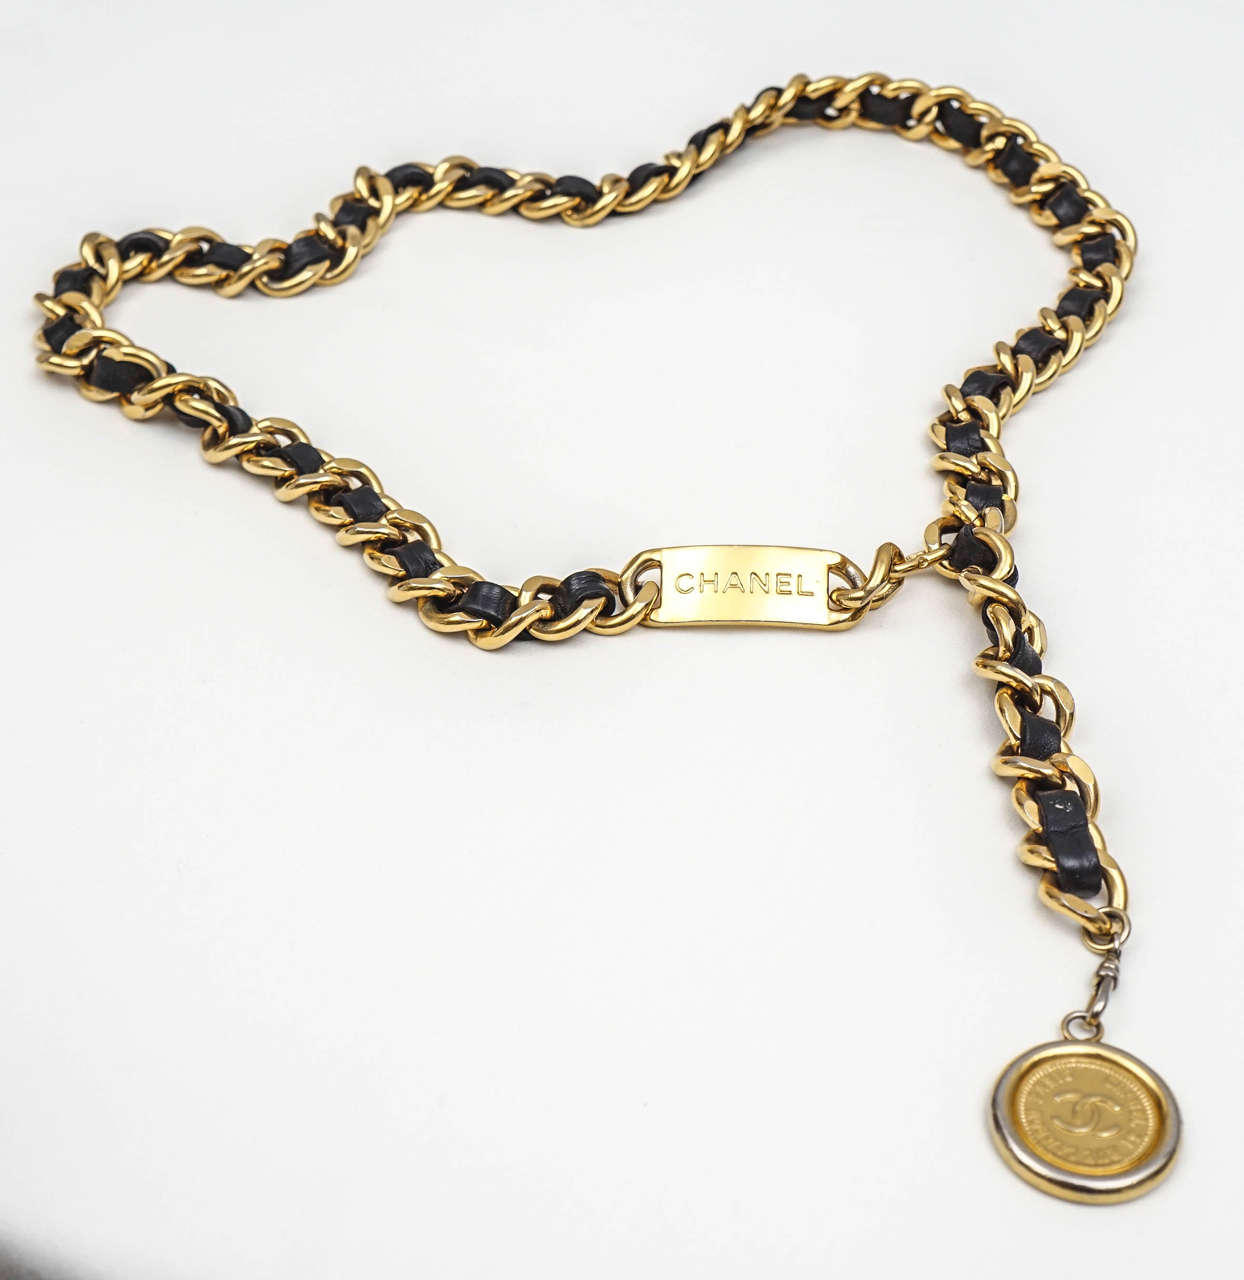 Classic Chanel woven leather and metal chain belt. with Chanel 